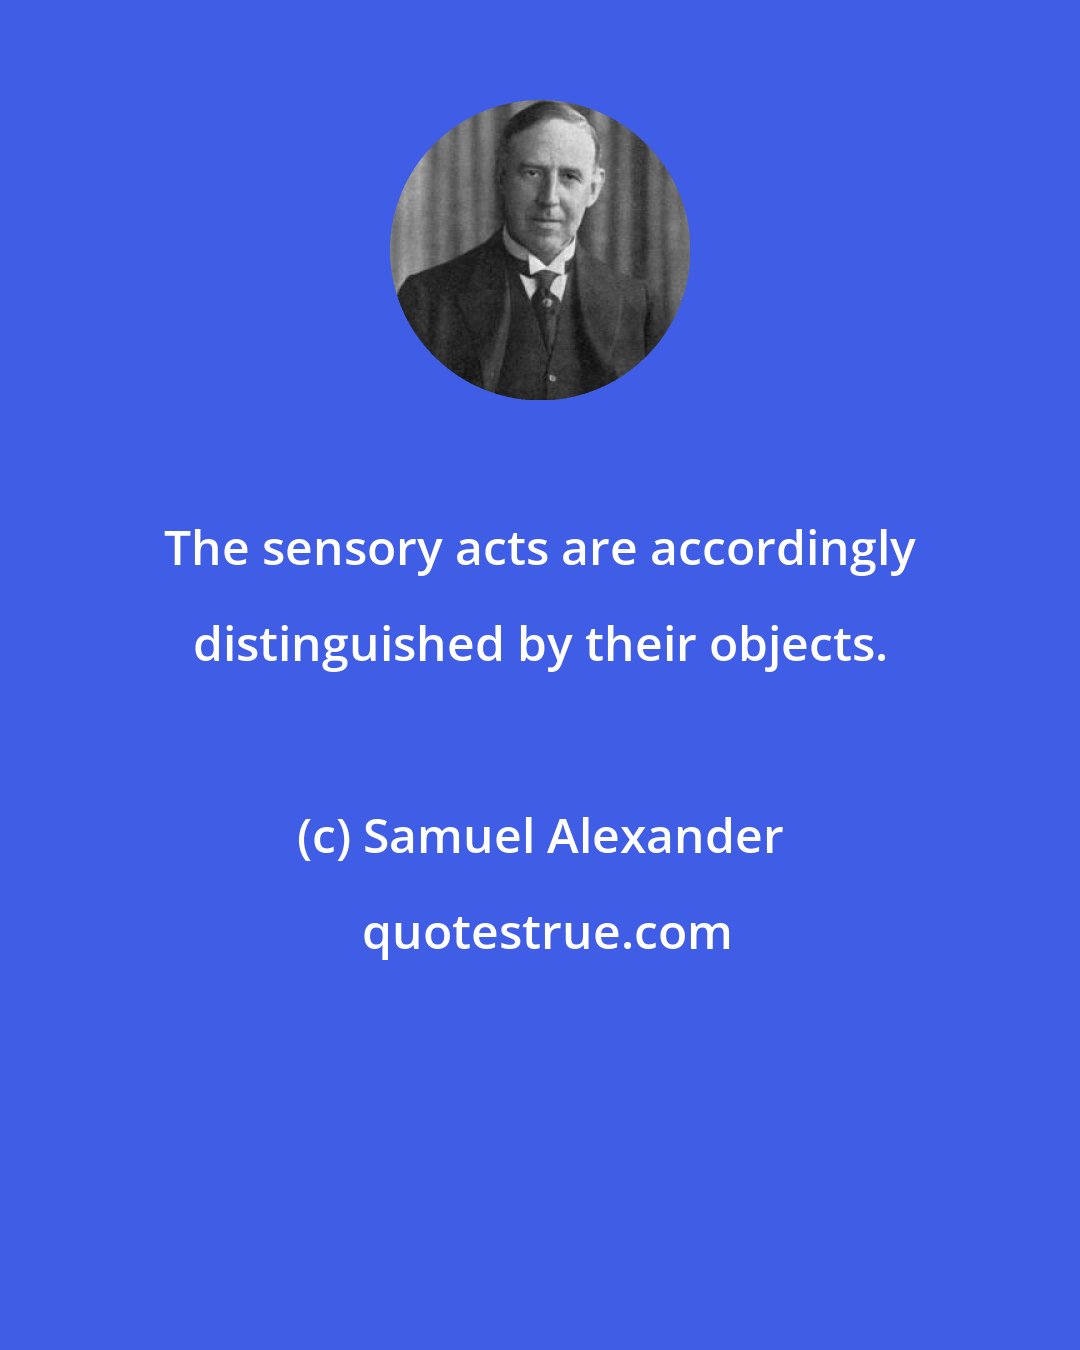 Samuel Alexander: The sensory acts are accordingly distinguished by their objects.